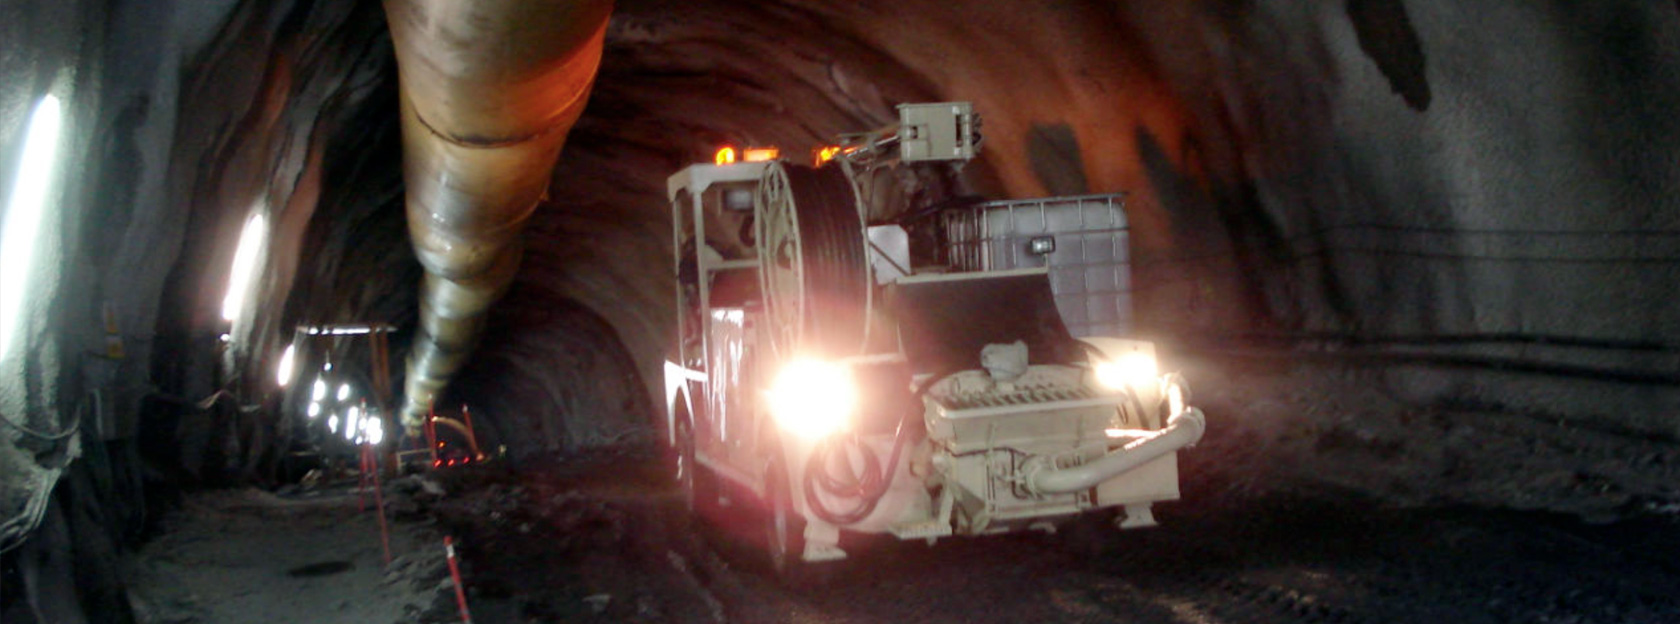 We design and build versatile and cost-effective shotcrete robots for tunnels and mine construction.